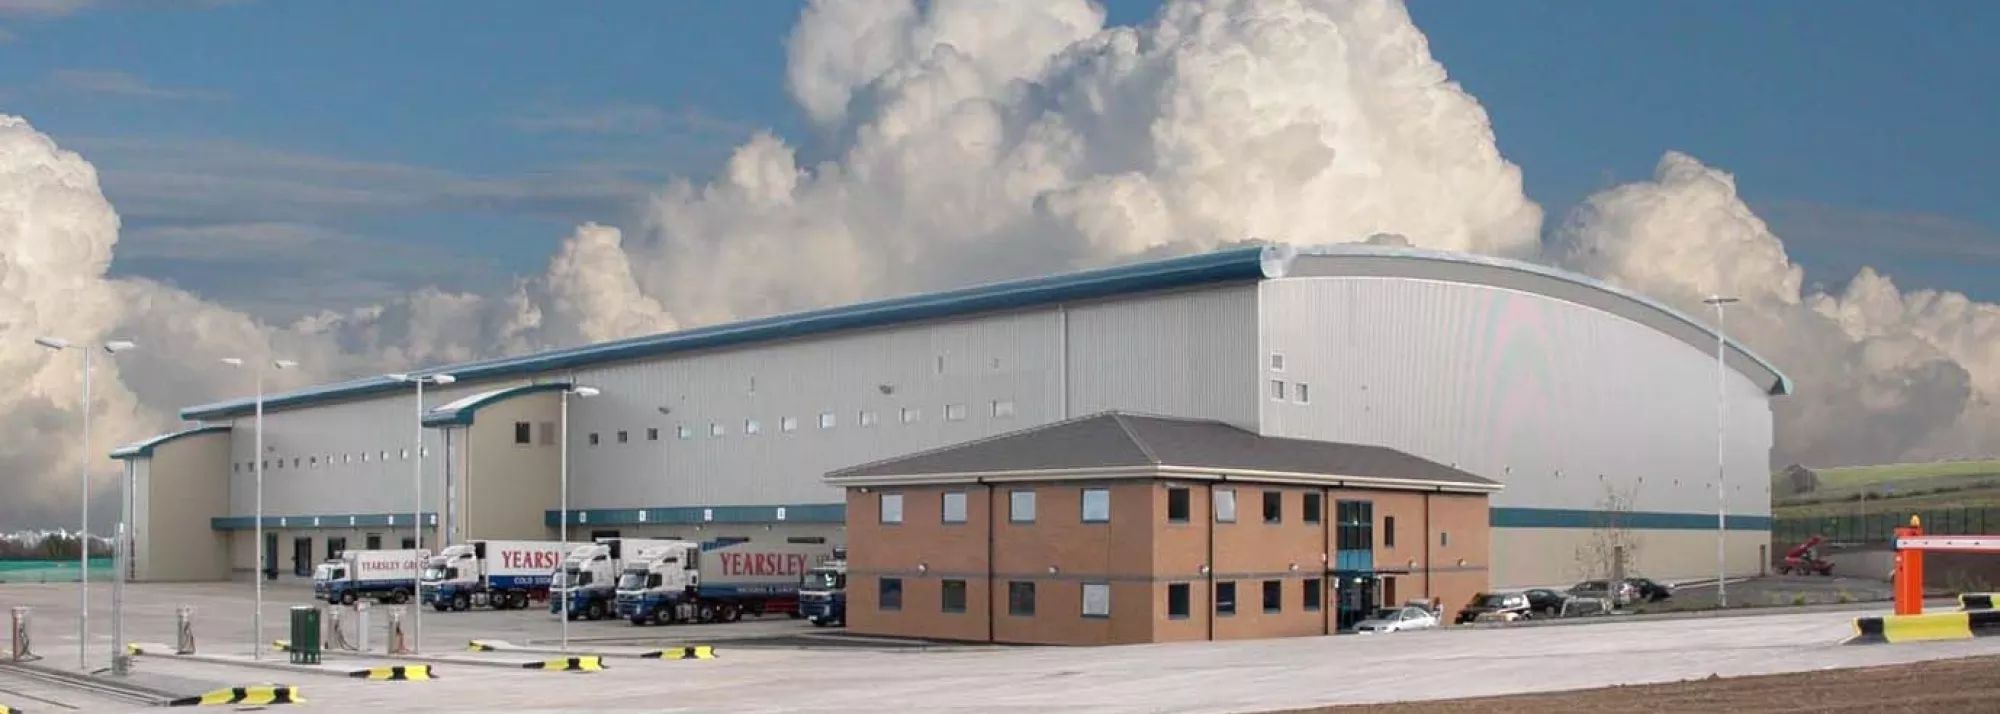 Exterior photo of Lineage's Seaham facility